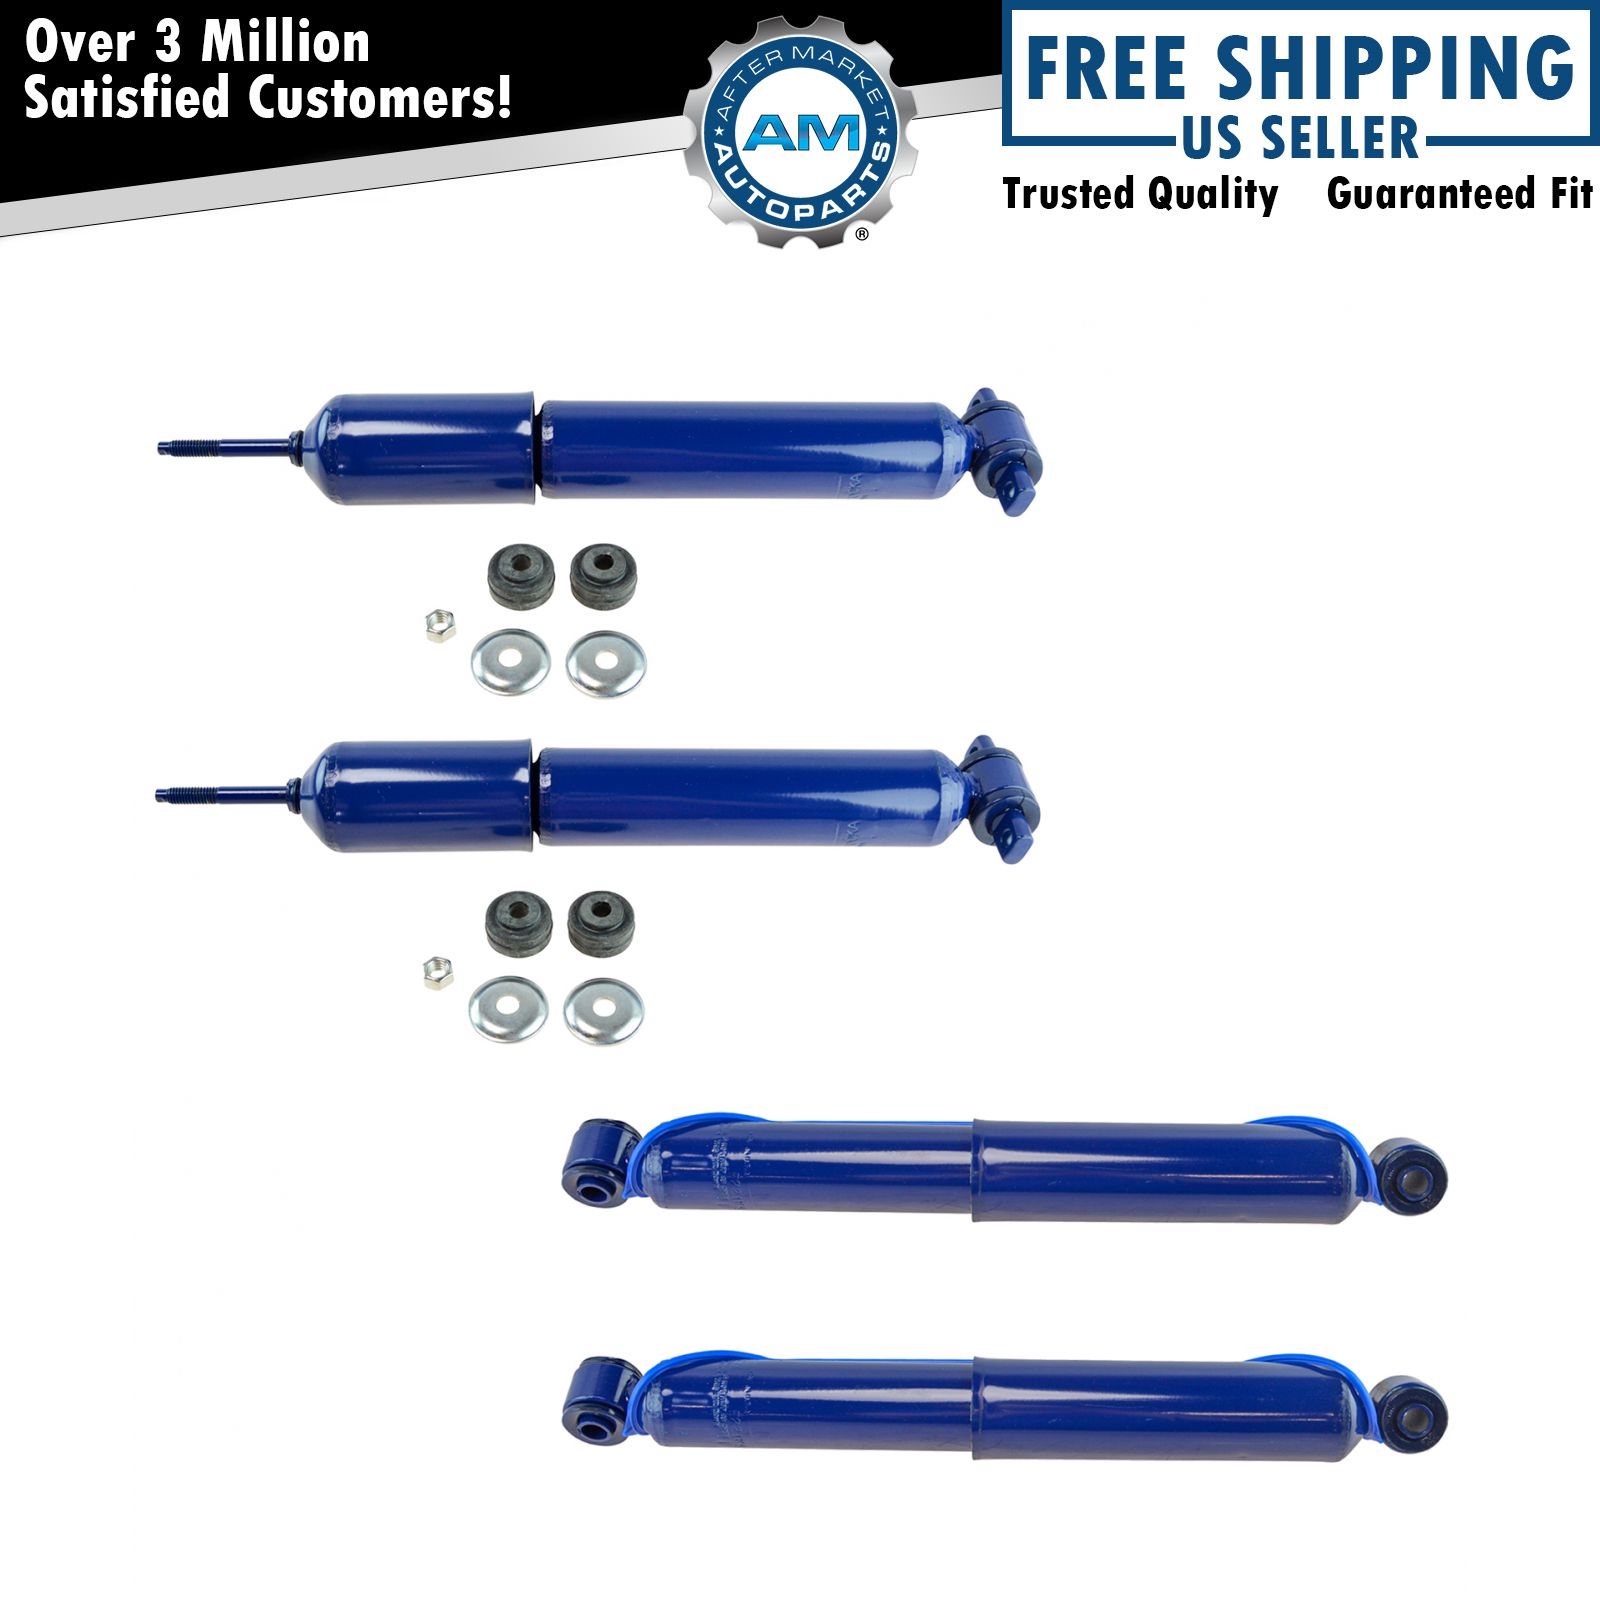 Monro-Matic Plus Front & Rear Shock Absorber Set of 4 for Chevy GMC Pickup Truck